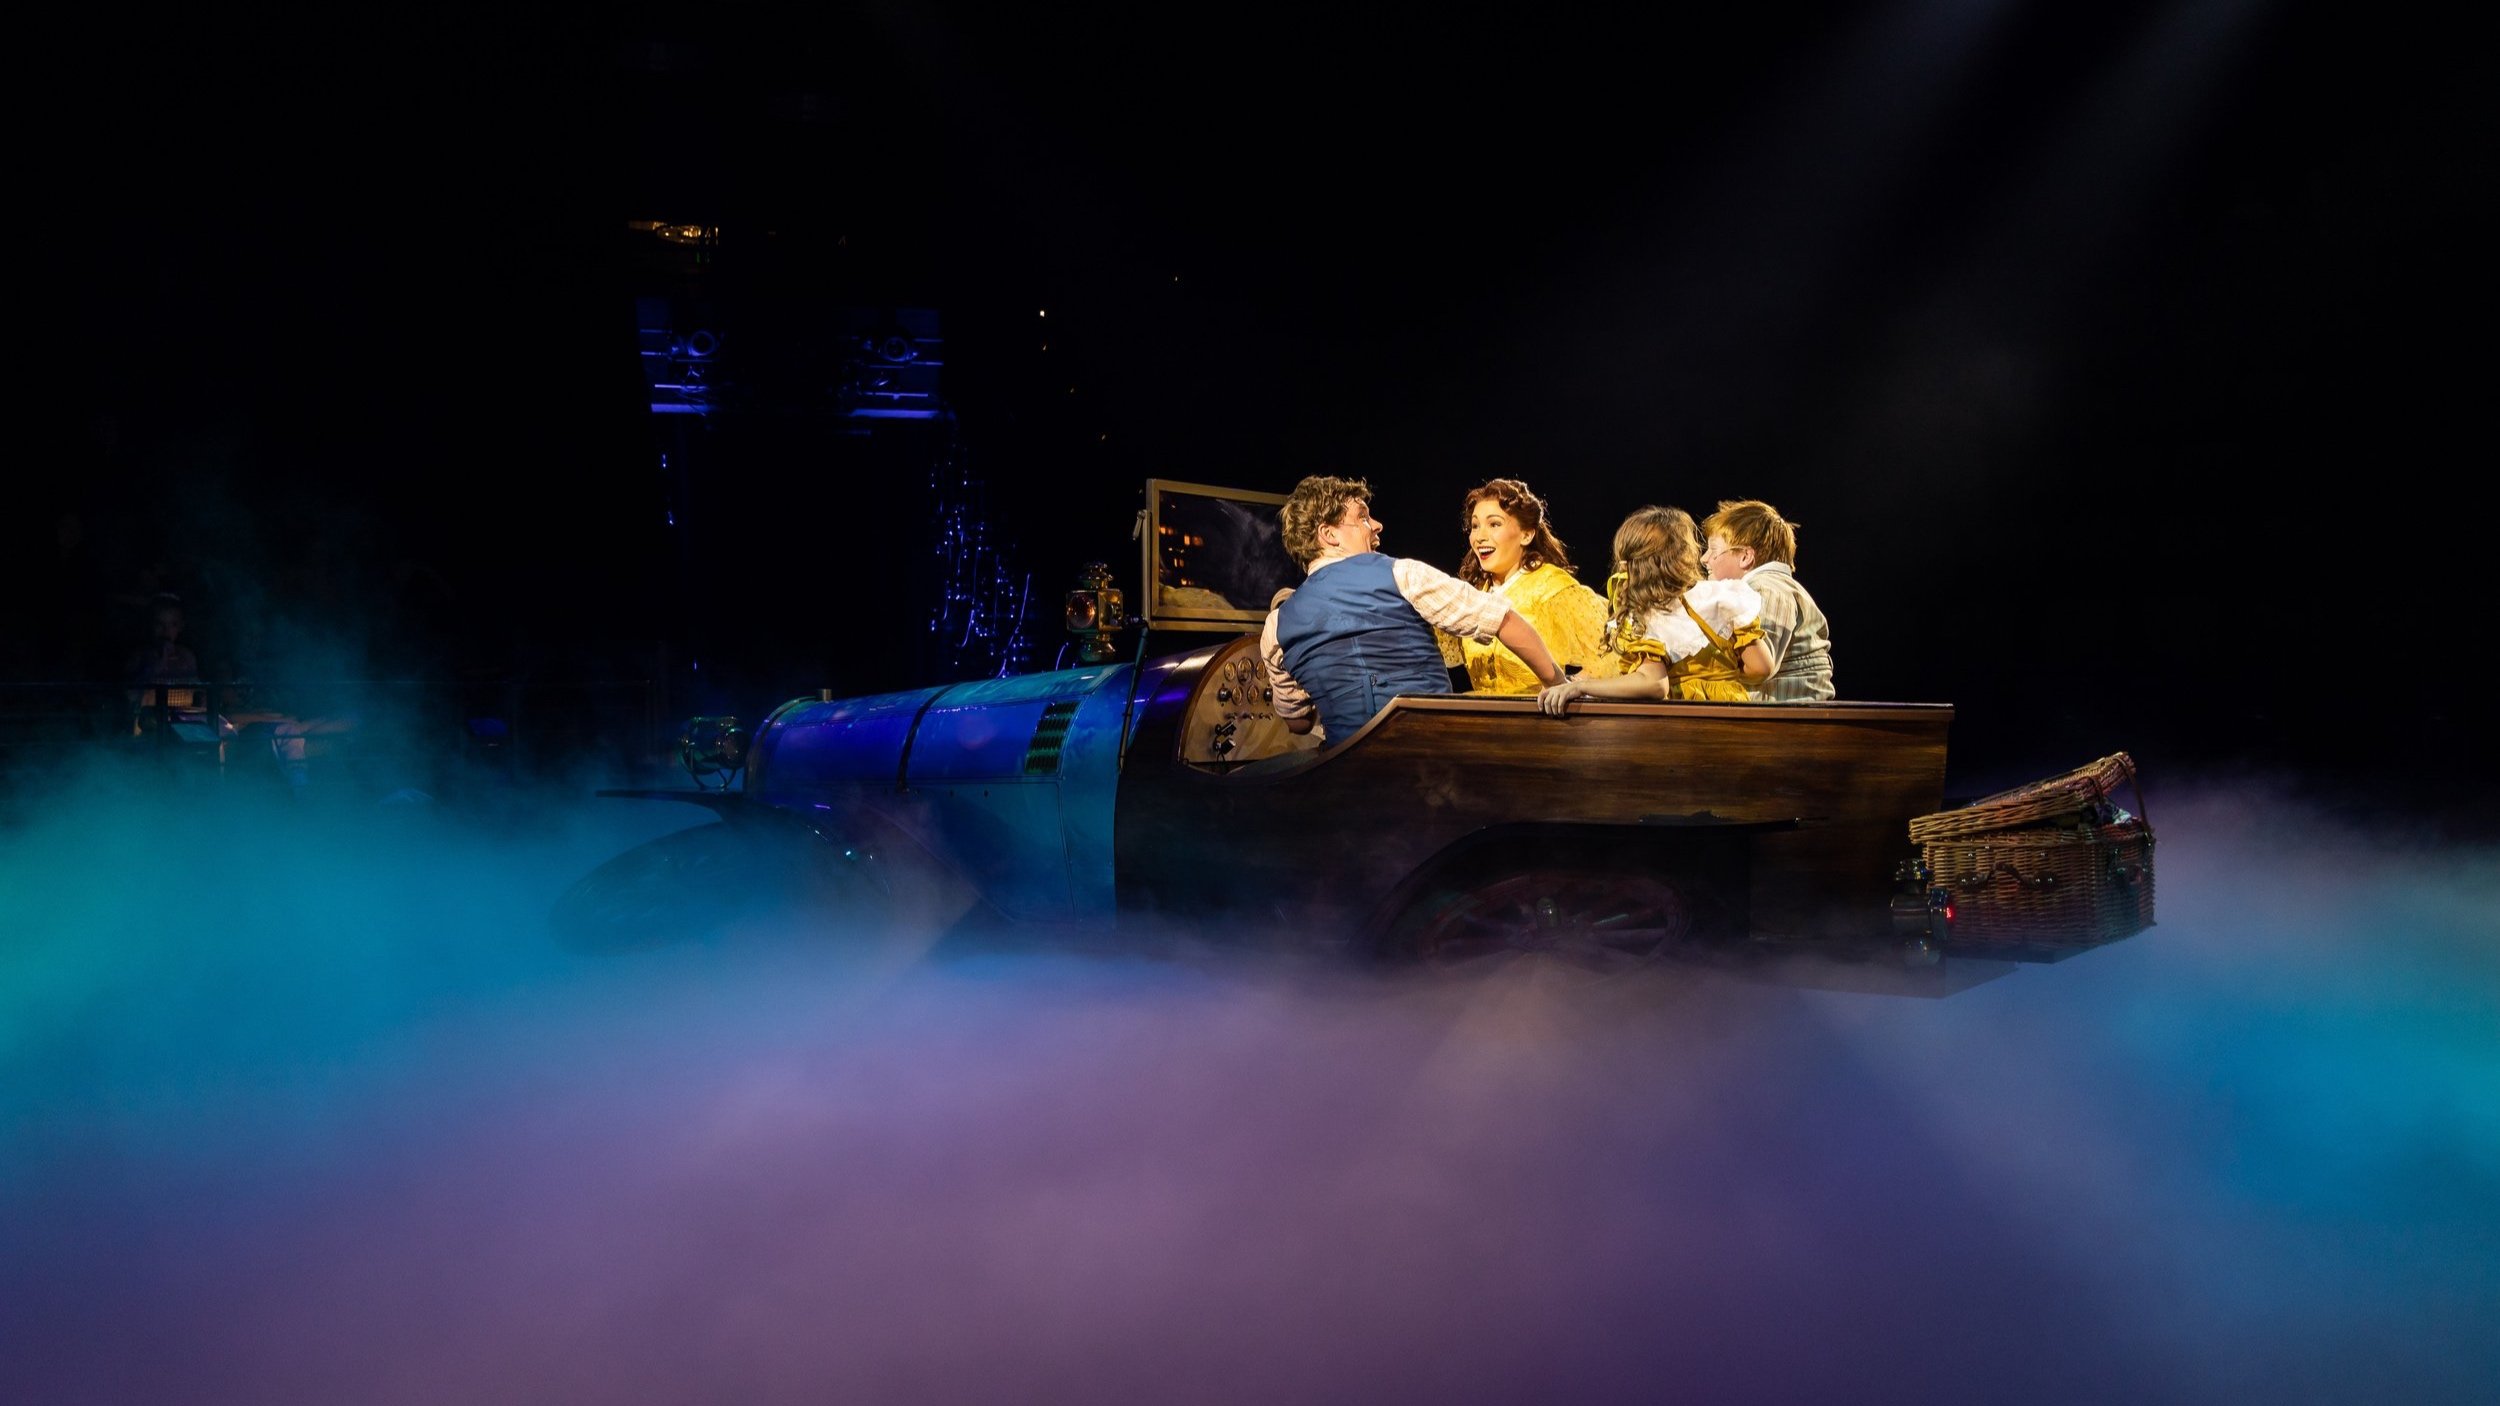 Teaira and cast mates on a flying car. From the musical Chitty Chitty Bang Bang.